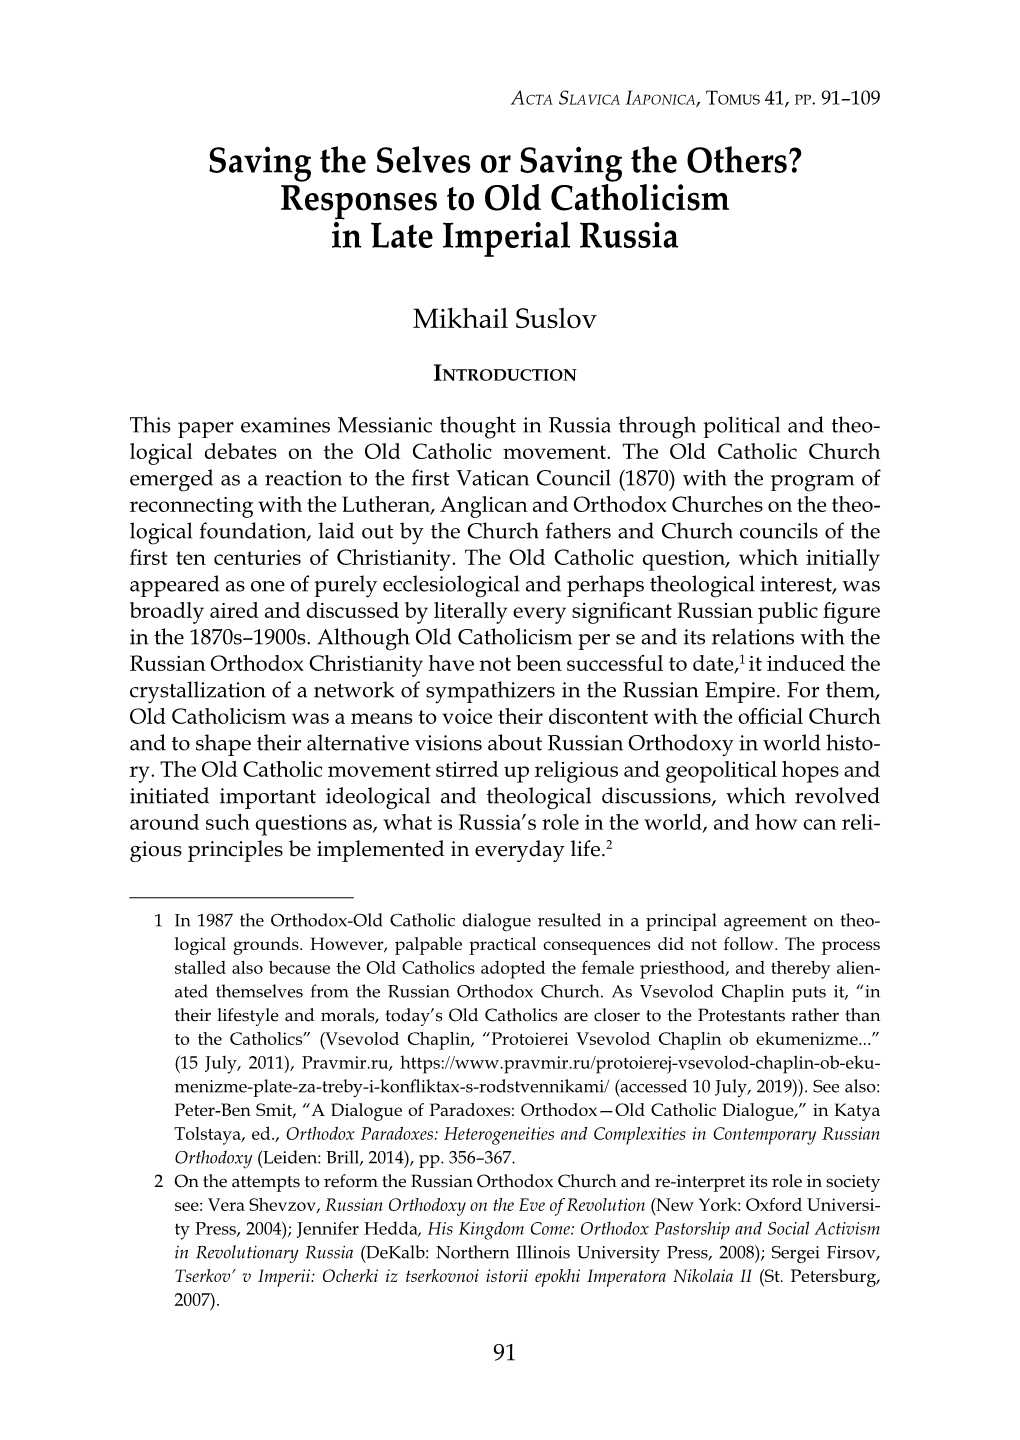 Responses to Old Catholicism in Late Imperial Russia